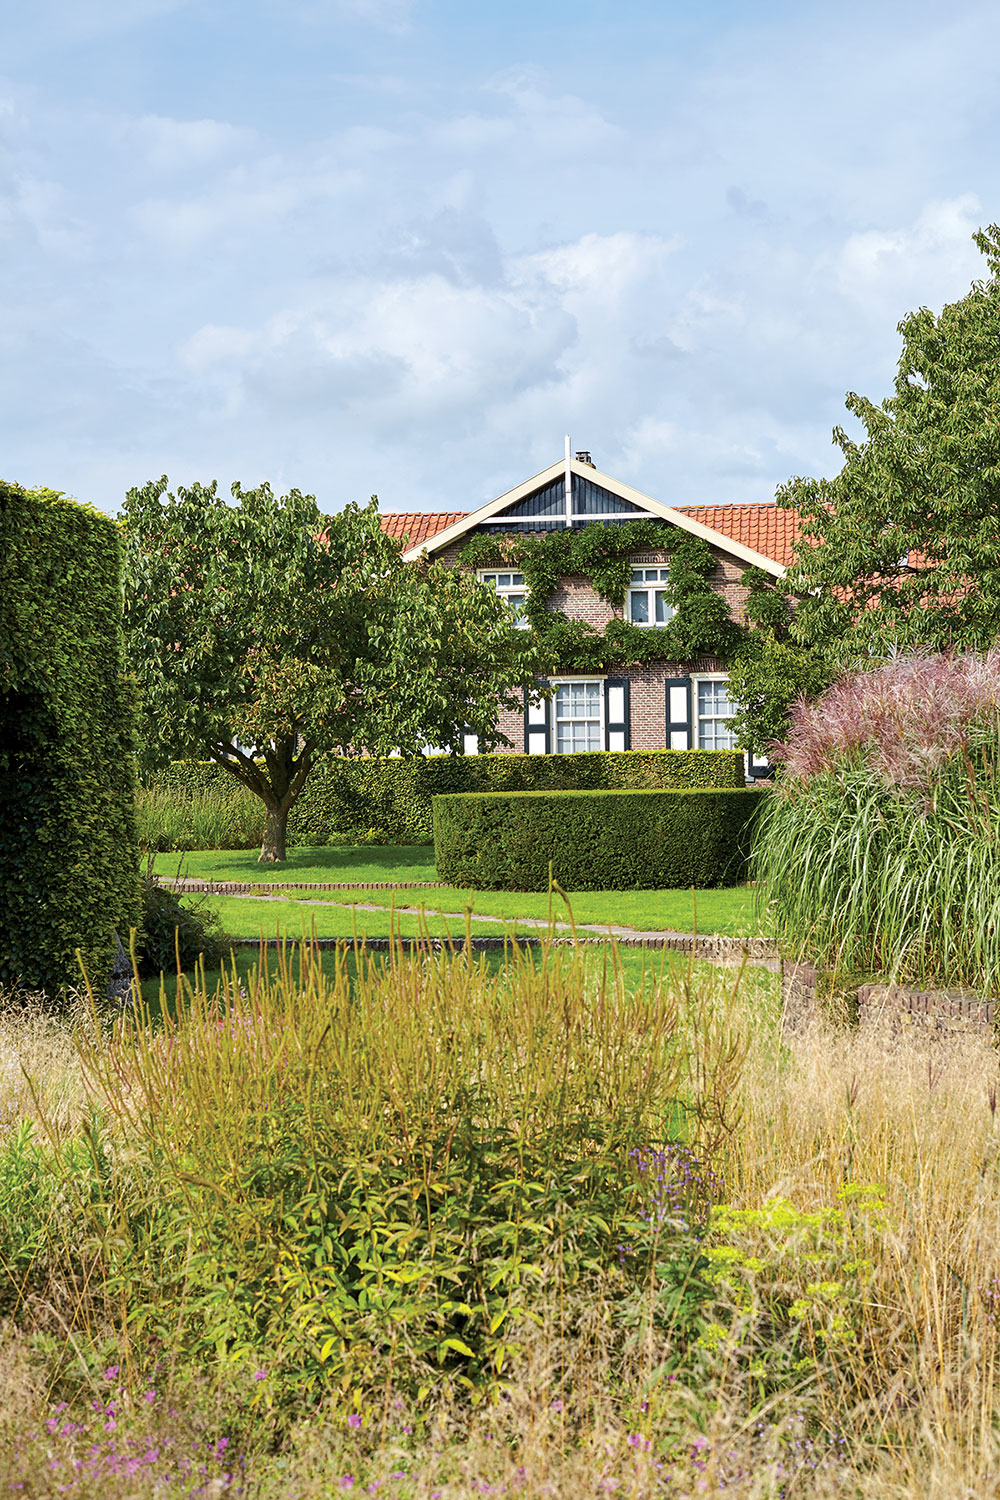 Piet Oudolf gardens and home